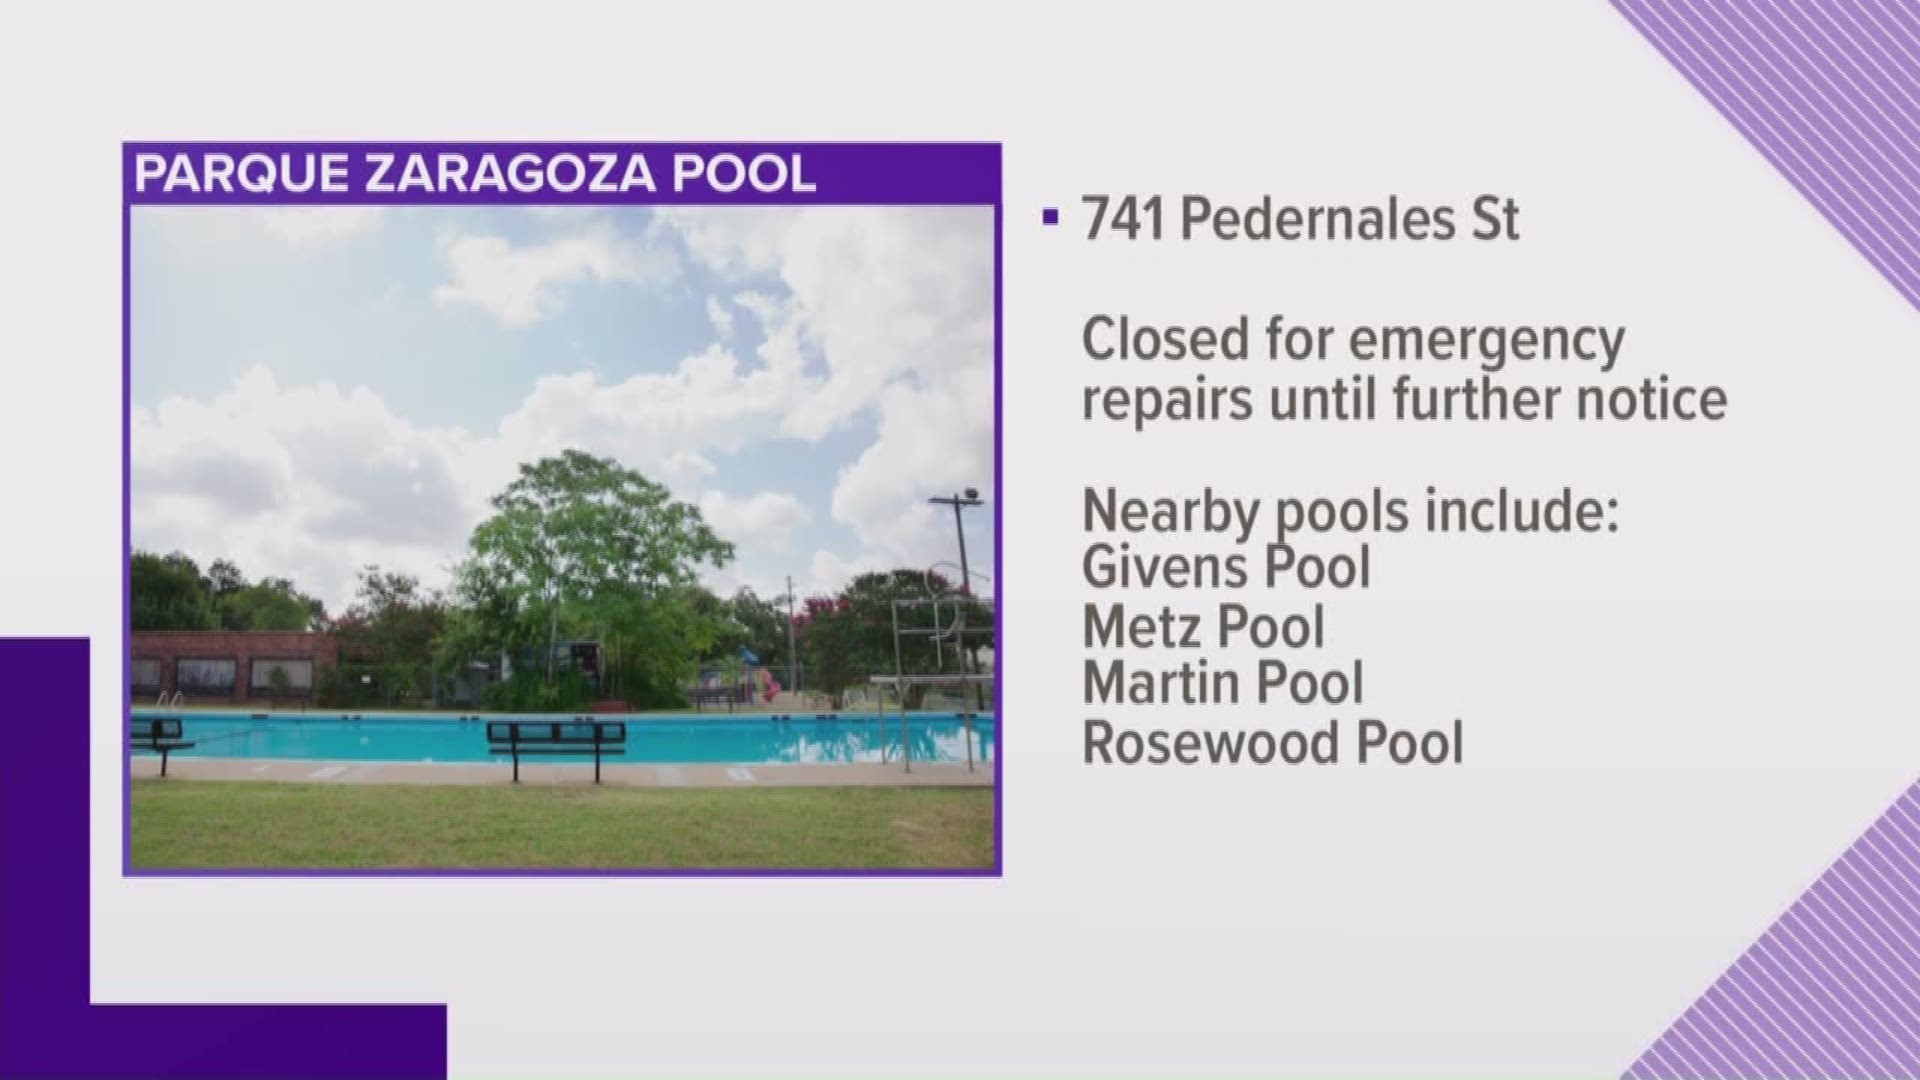 Parque Zaragoza Neighborhood Pool, located on Pedernales Street, was Saturday it was temporarily closed until further notice.